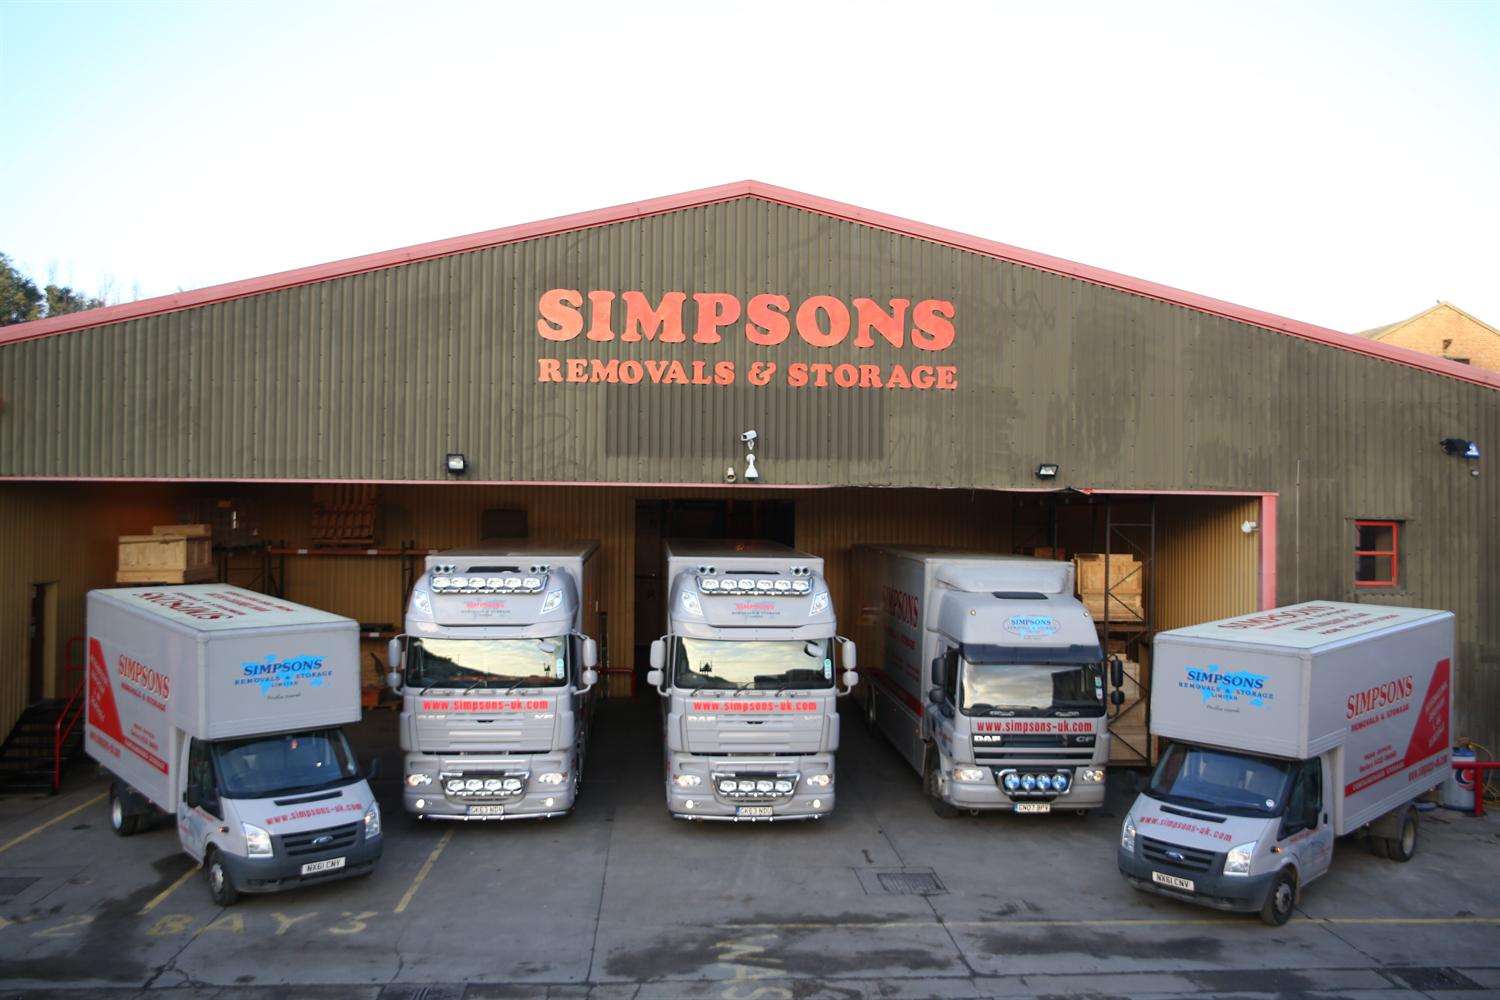 Simpsons Removals and Storage's base at Manor Way Business Park in Swanscombe